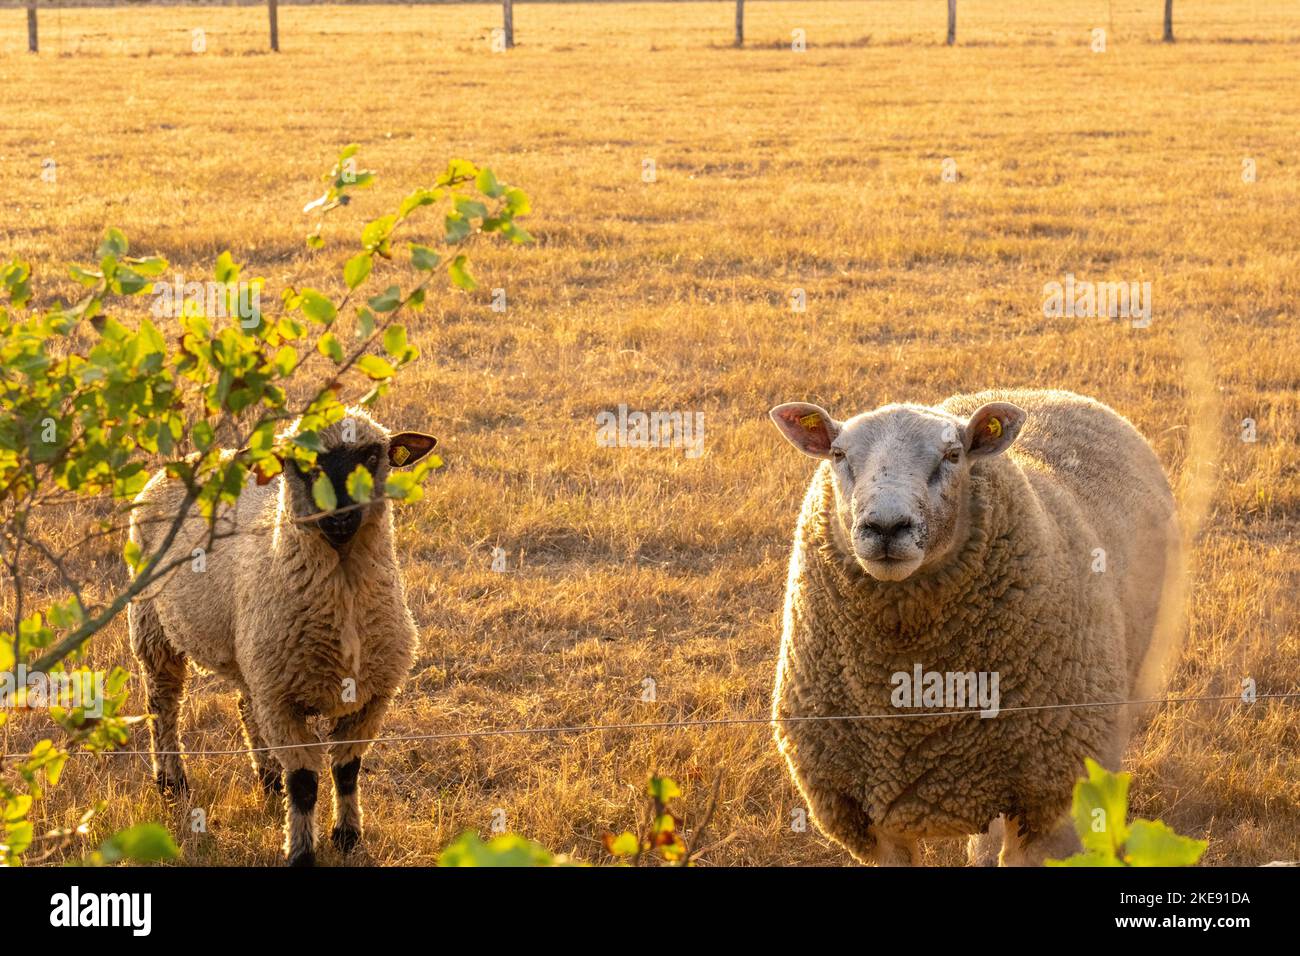 white Sheeps in paddock.Animal husbandry and agriculture concept.Breeding and rearing sheep.Sheep woolen breeds.Three sheep portrait Stock Photo